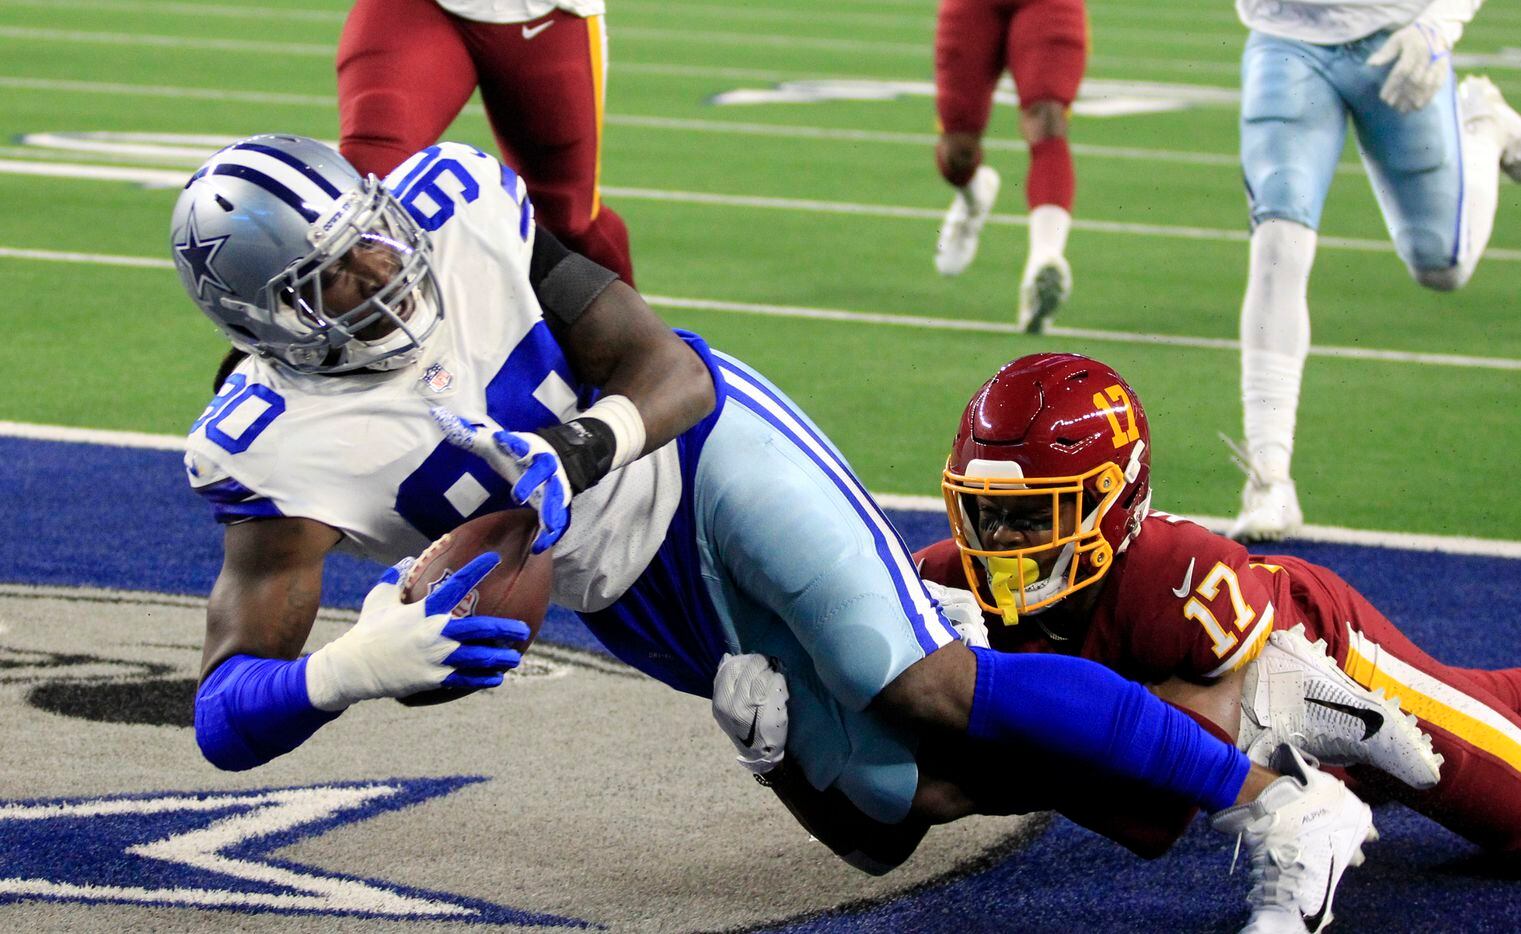 Dallas Cowboys defensive end Demarcus Lawrence (90) falls into the end zone for a touchdown, as Washington Football Team wide receiver Terry McLaurin (17) arrives late during the first half of a NFL football game at AT&T Stadium in Arlington, TX on Sunday, December 26, 2021.